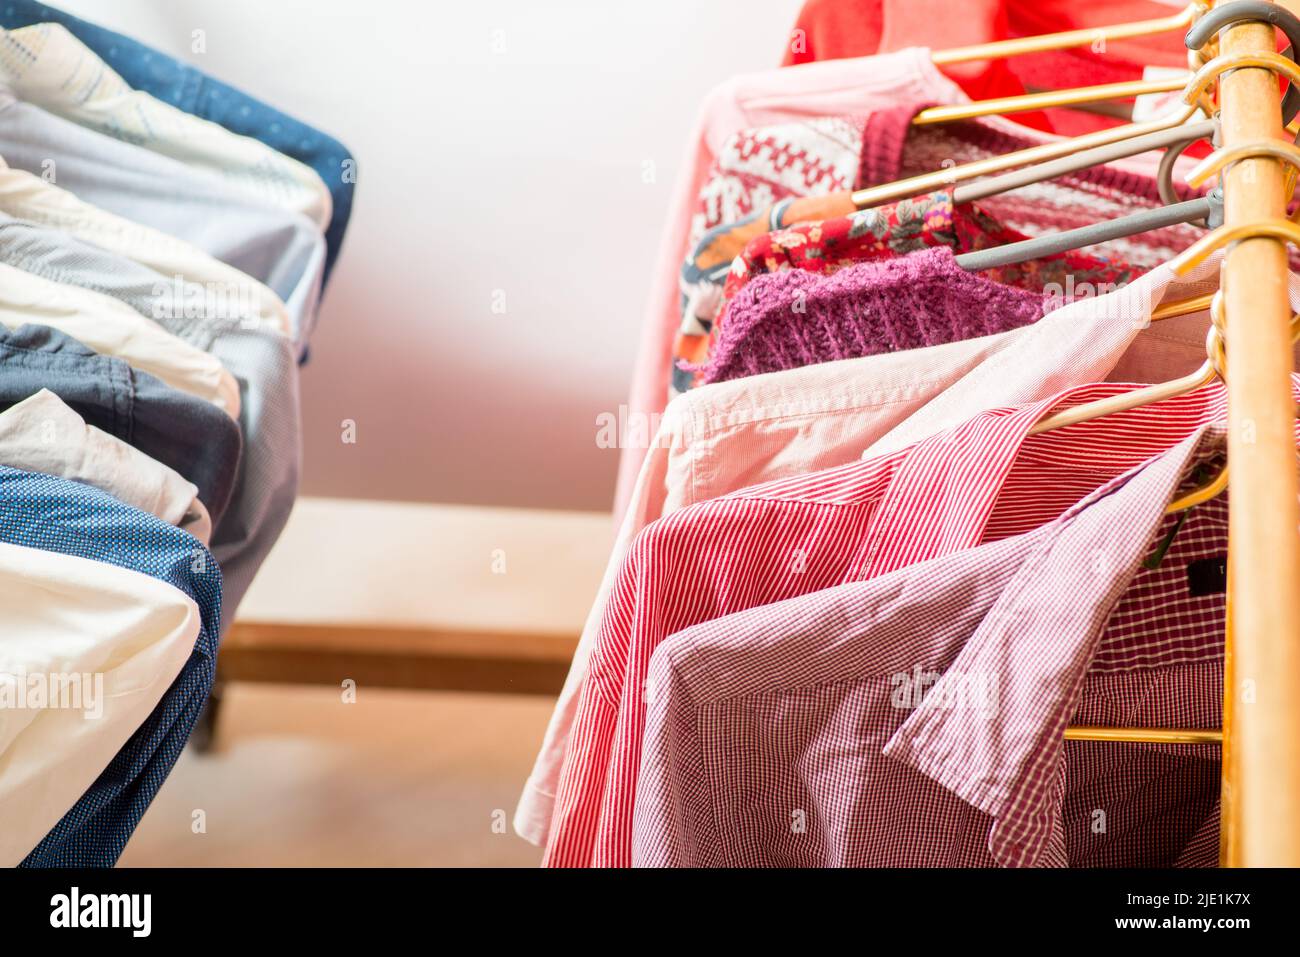 Clothes are hanging on hangers. Many things in the wardrobe on hangers Stock Photo